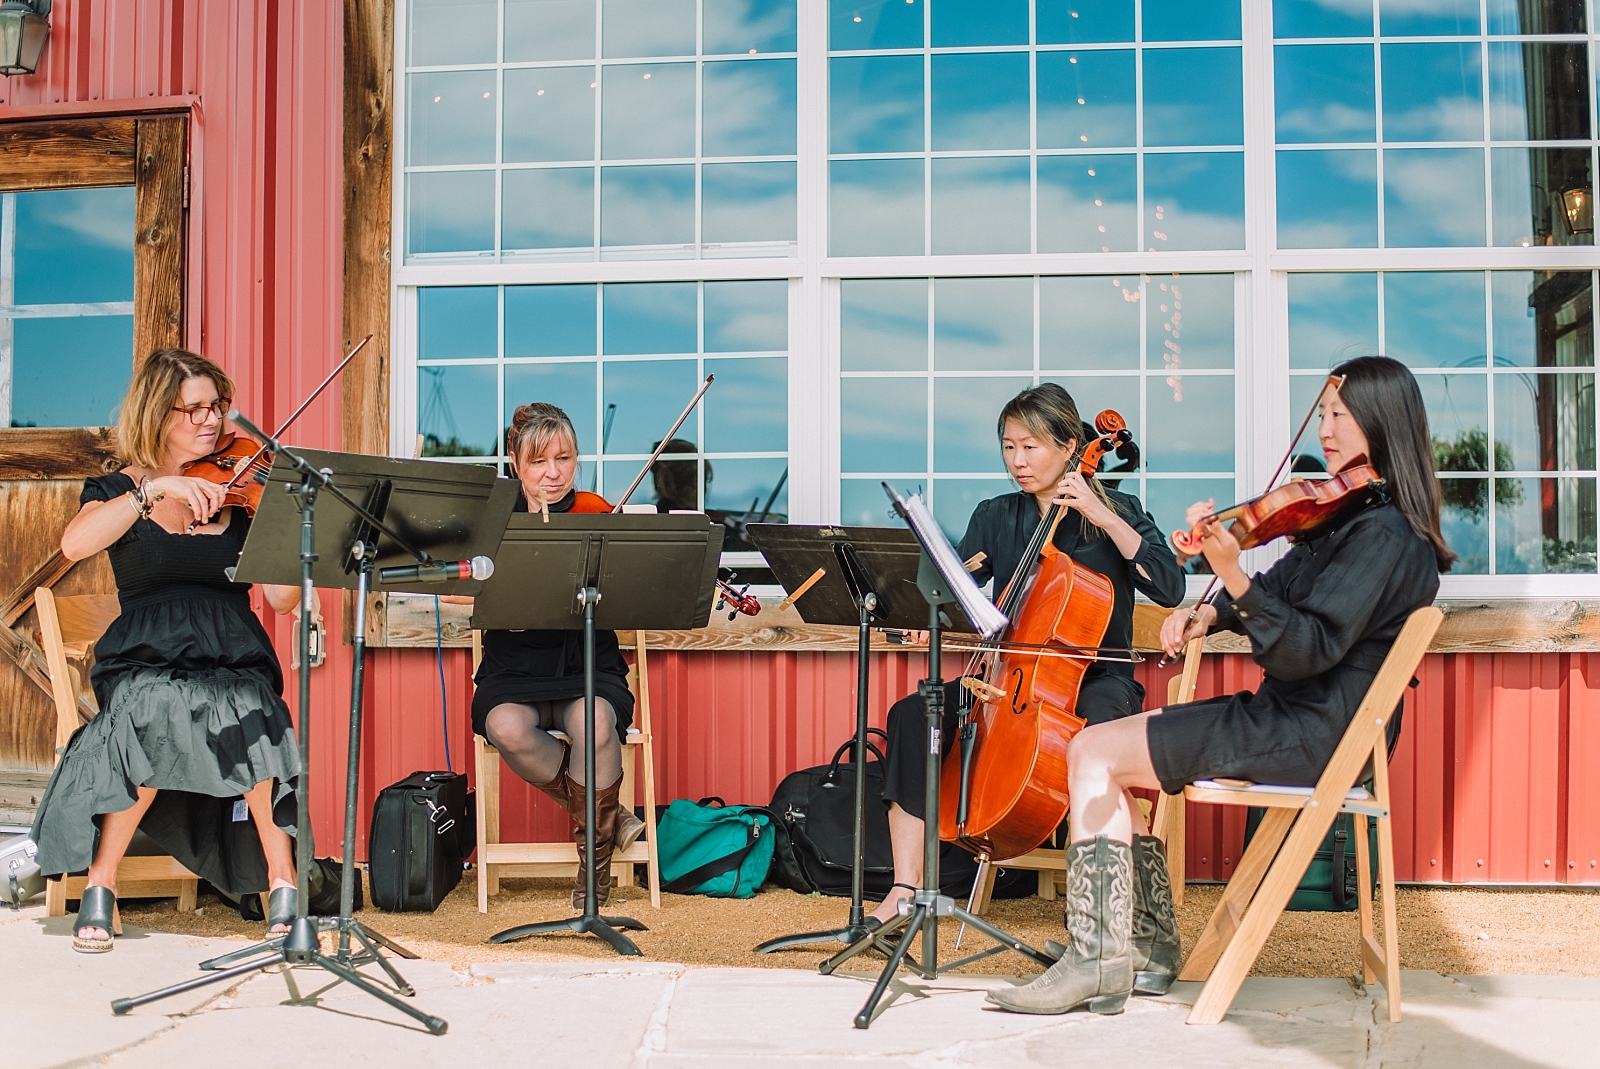 snake river strings performs during diamond cross ranch wedding ceremony